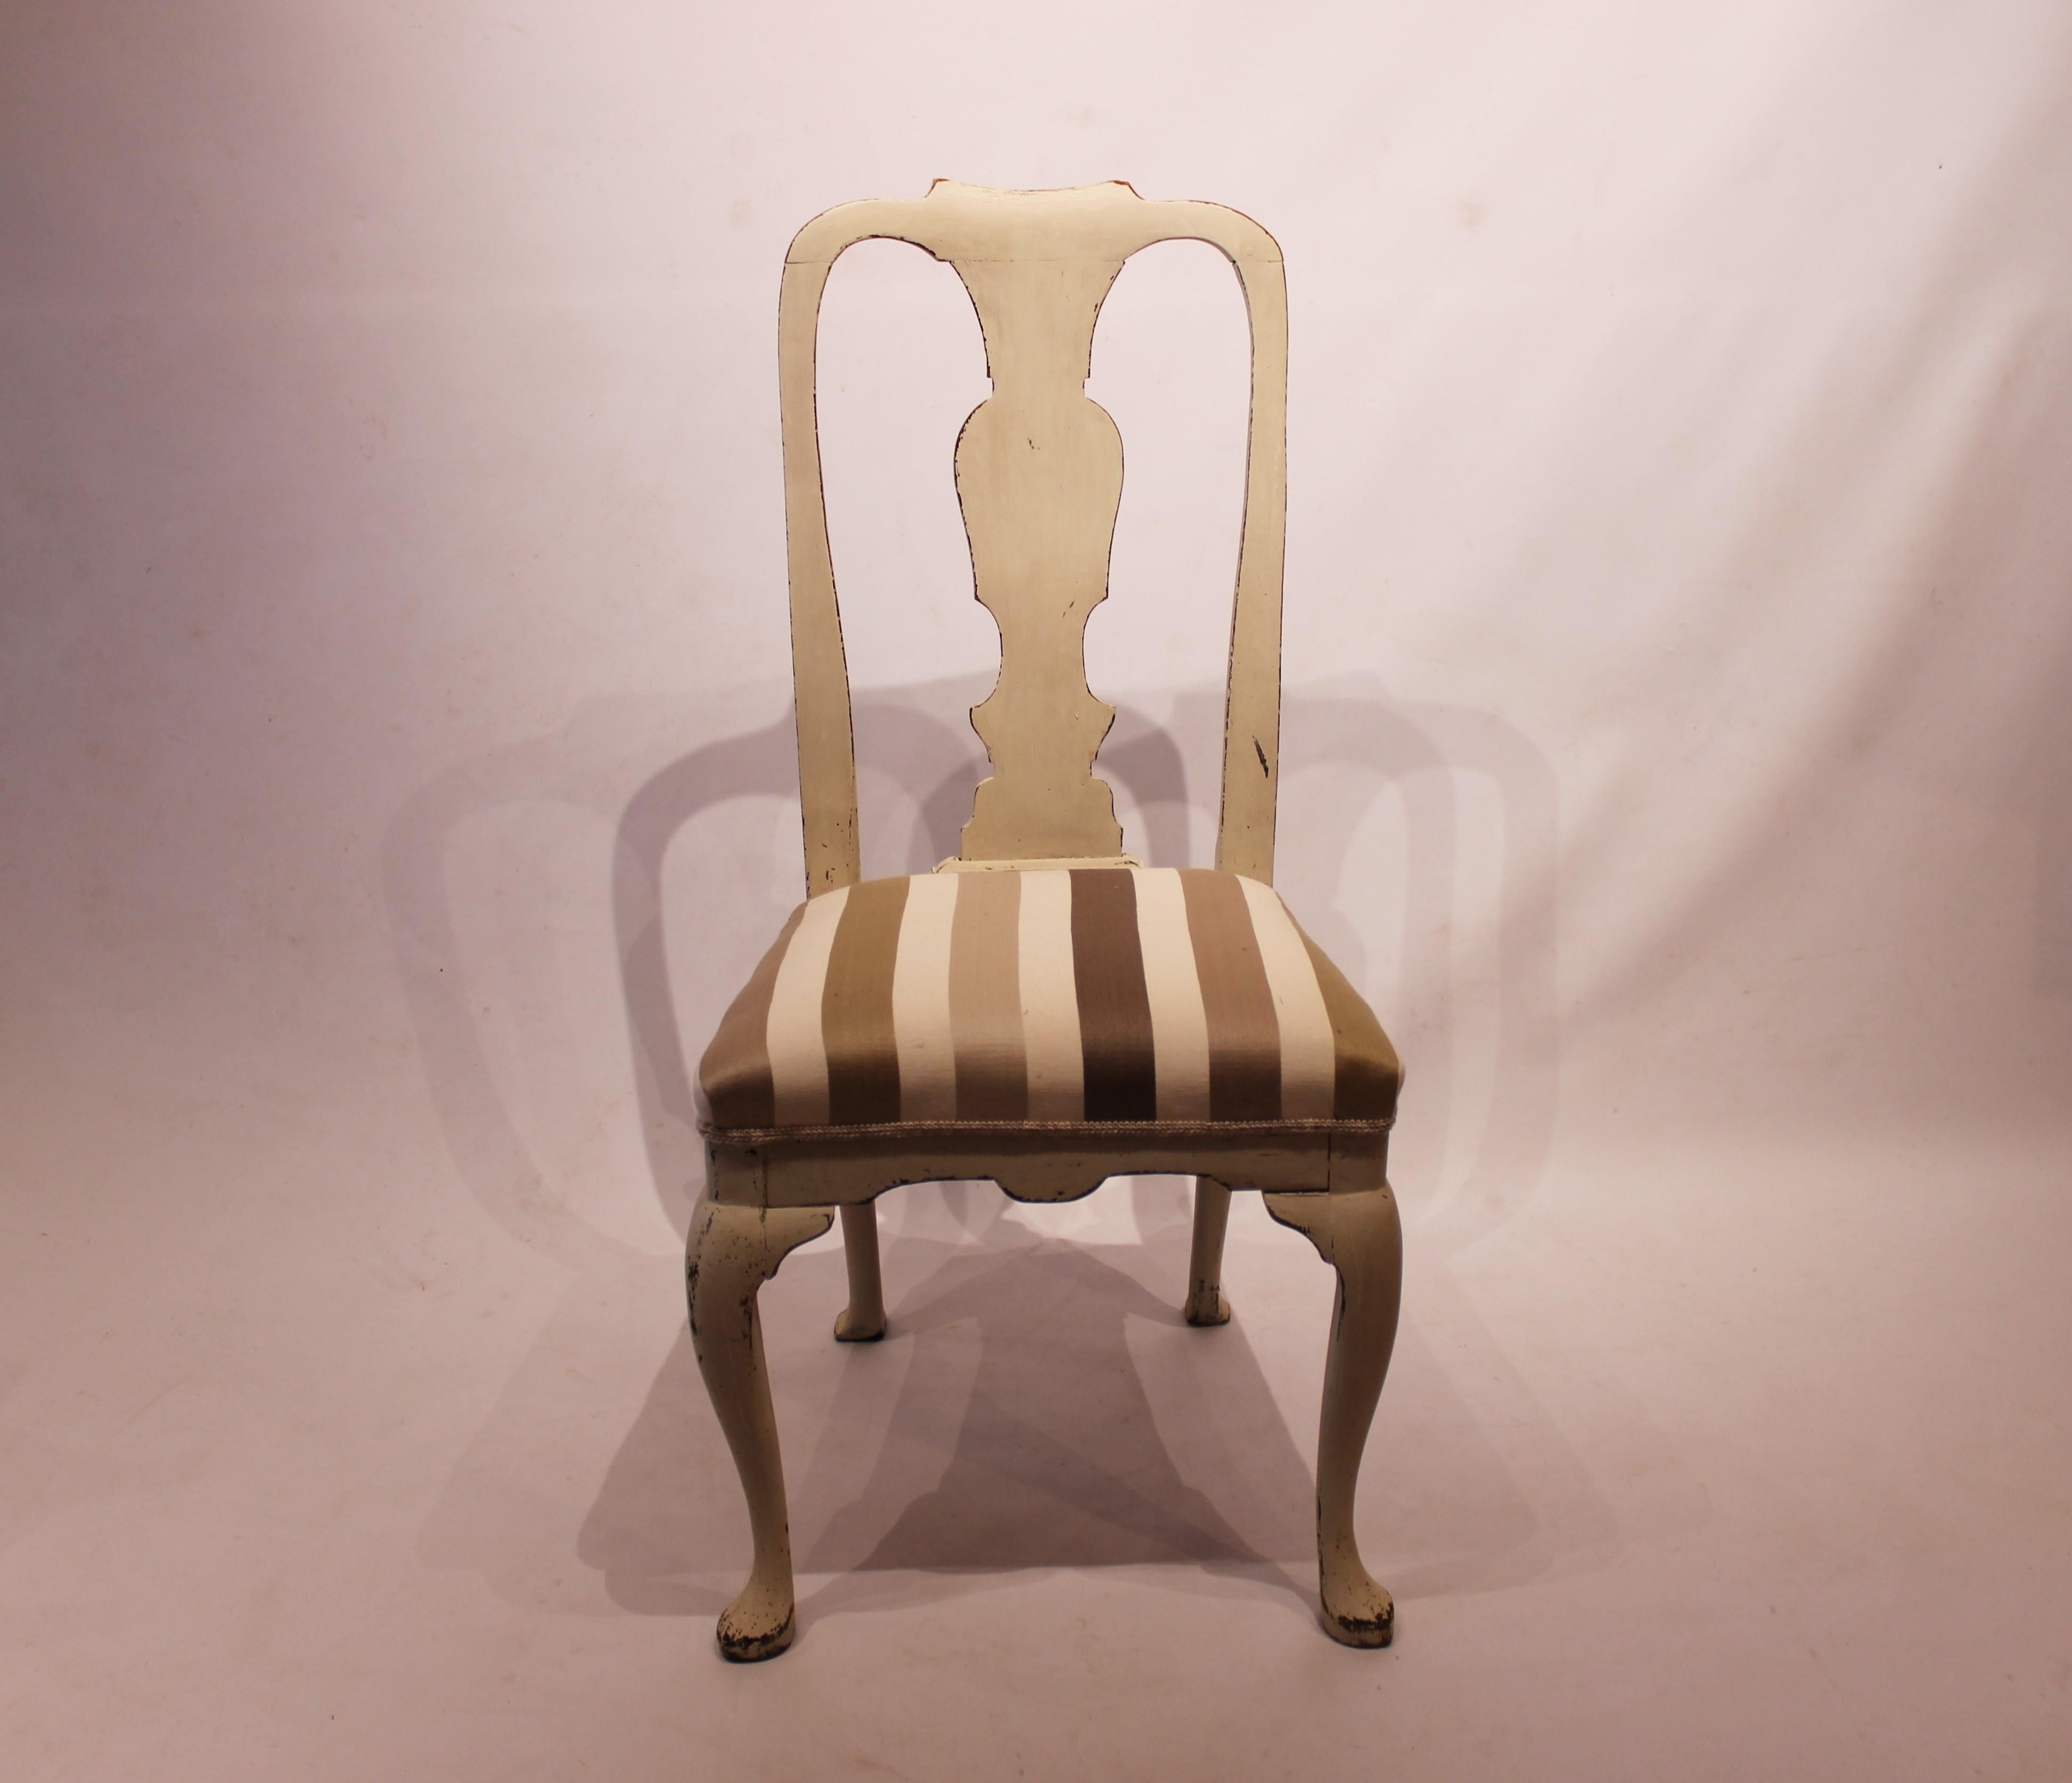 White painted Rococo dining chair with striped upholstery from the 1760s. The chair is in great vintage condition.